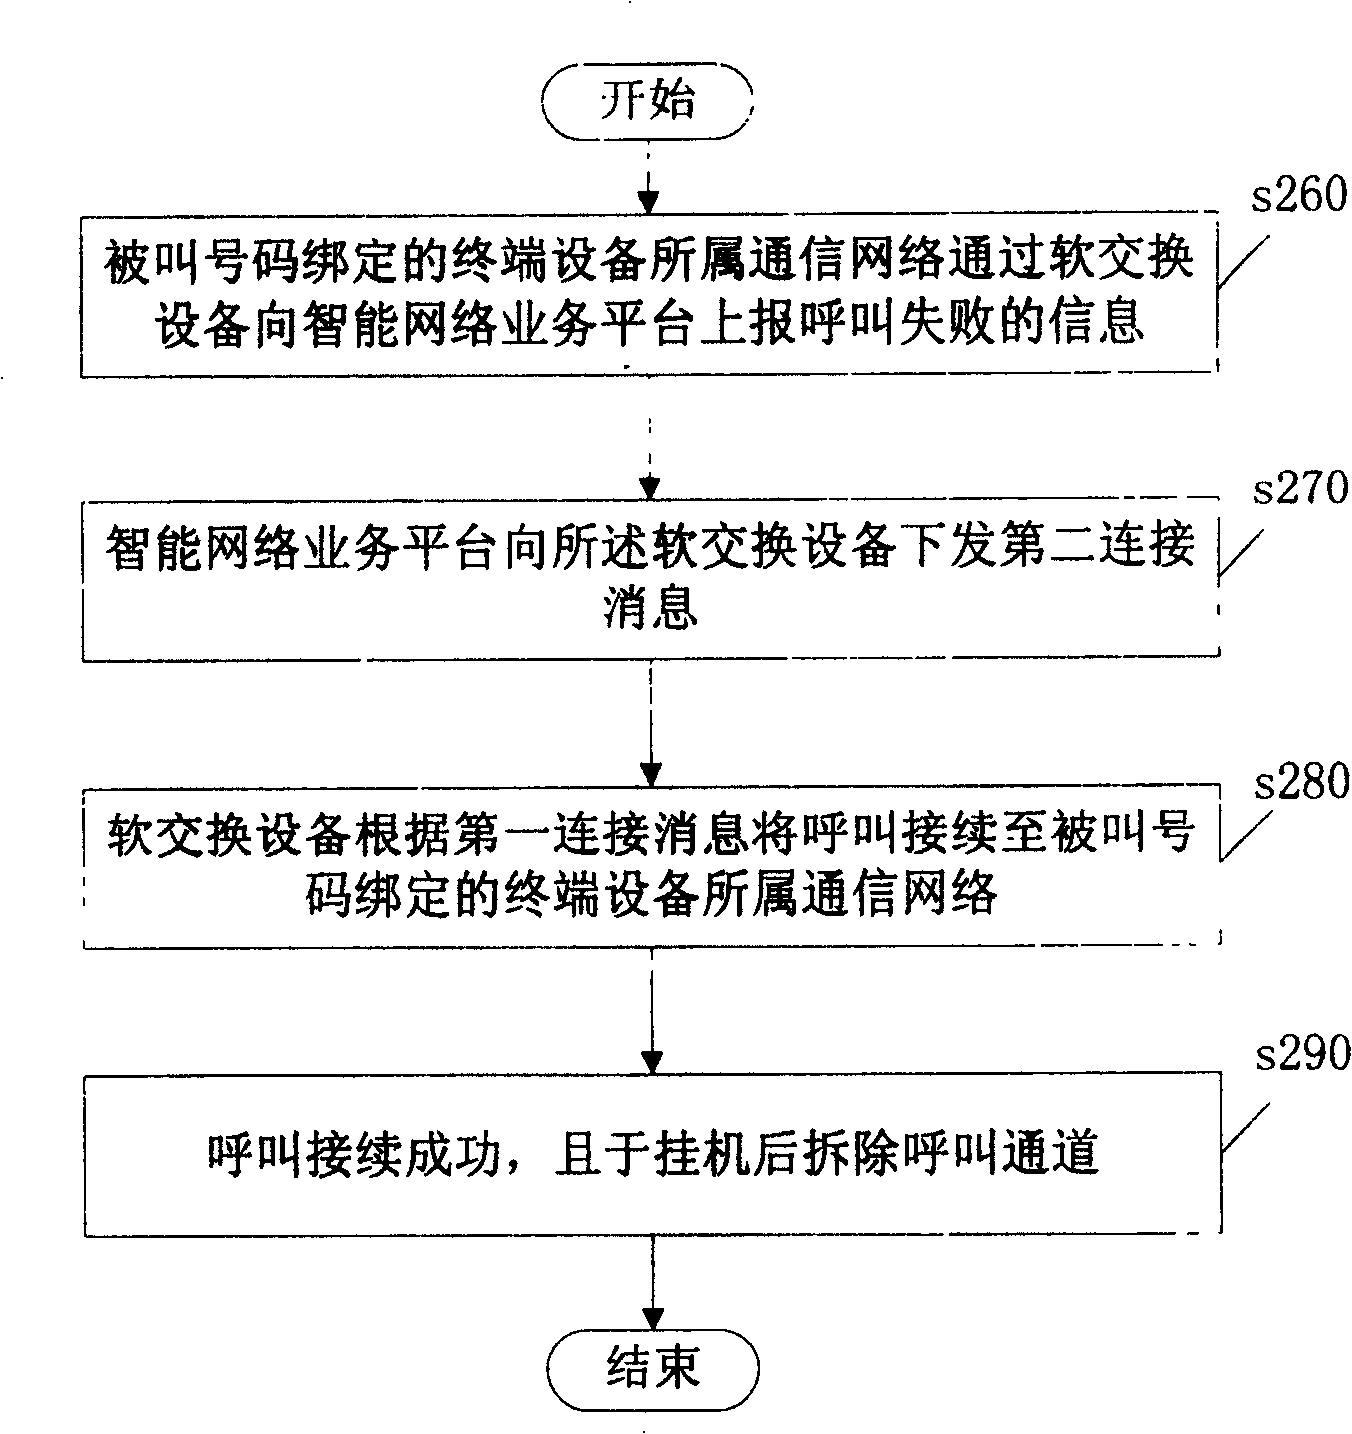 Calling continuing method and system based on intelligent network control